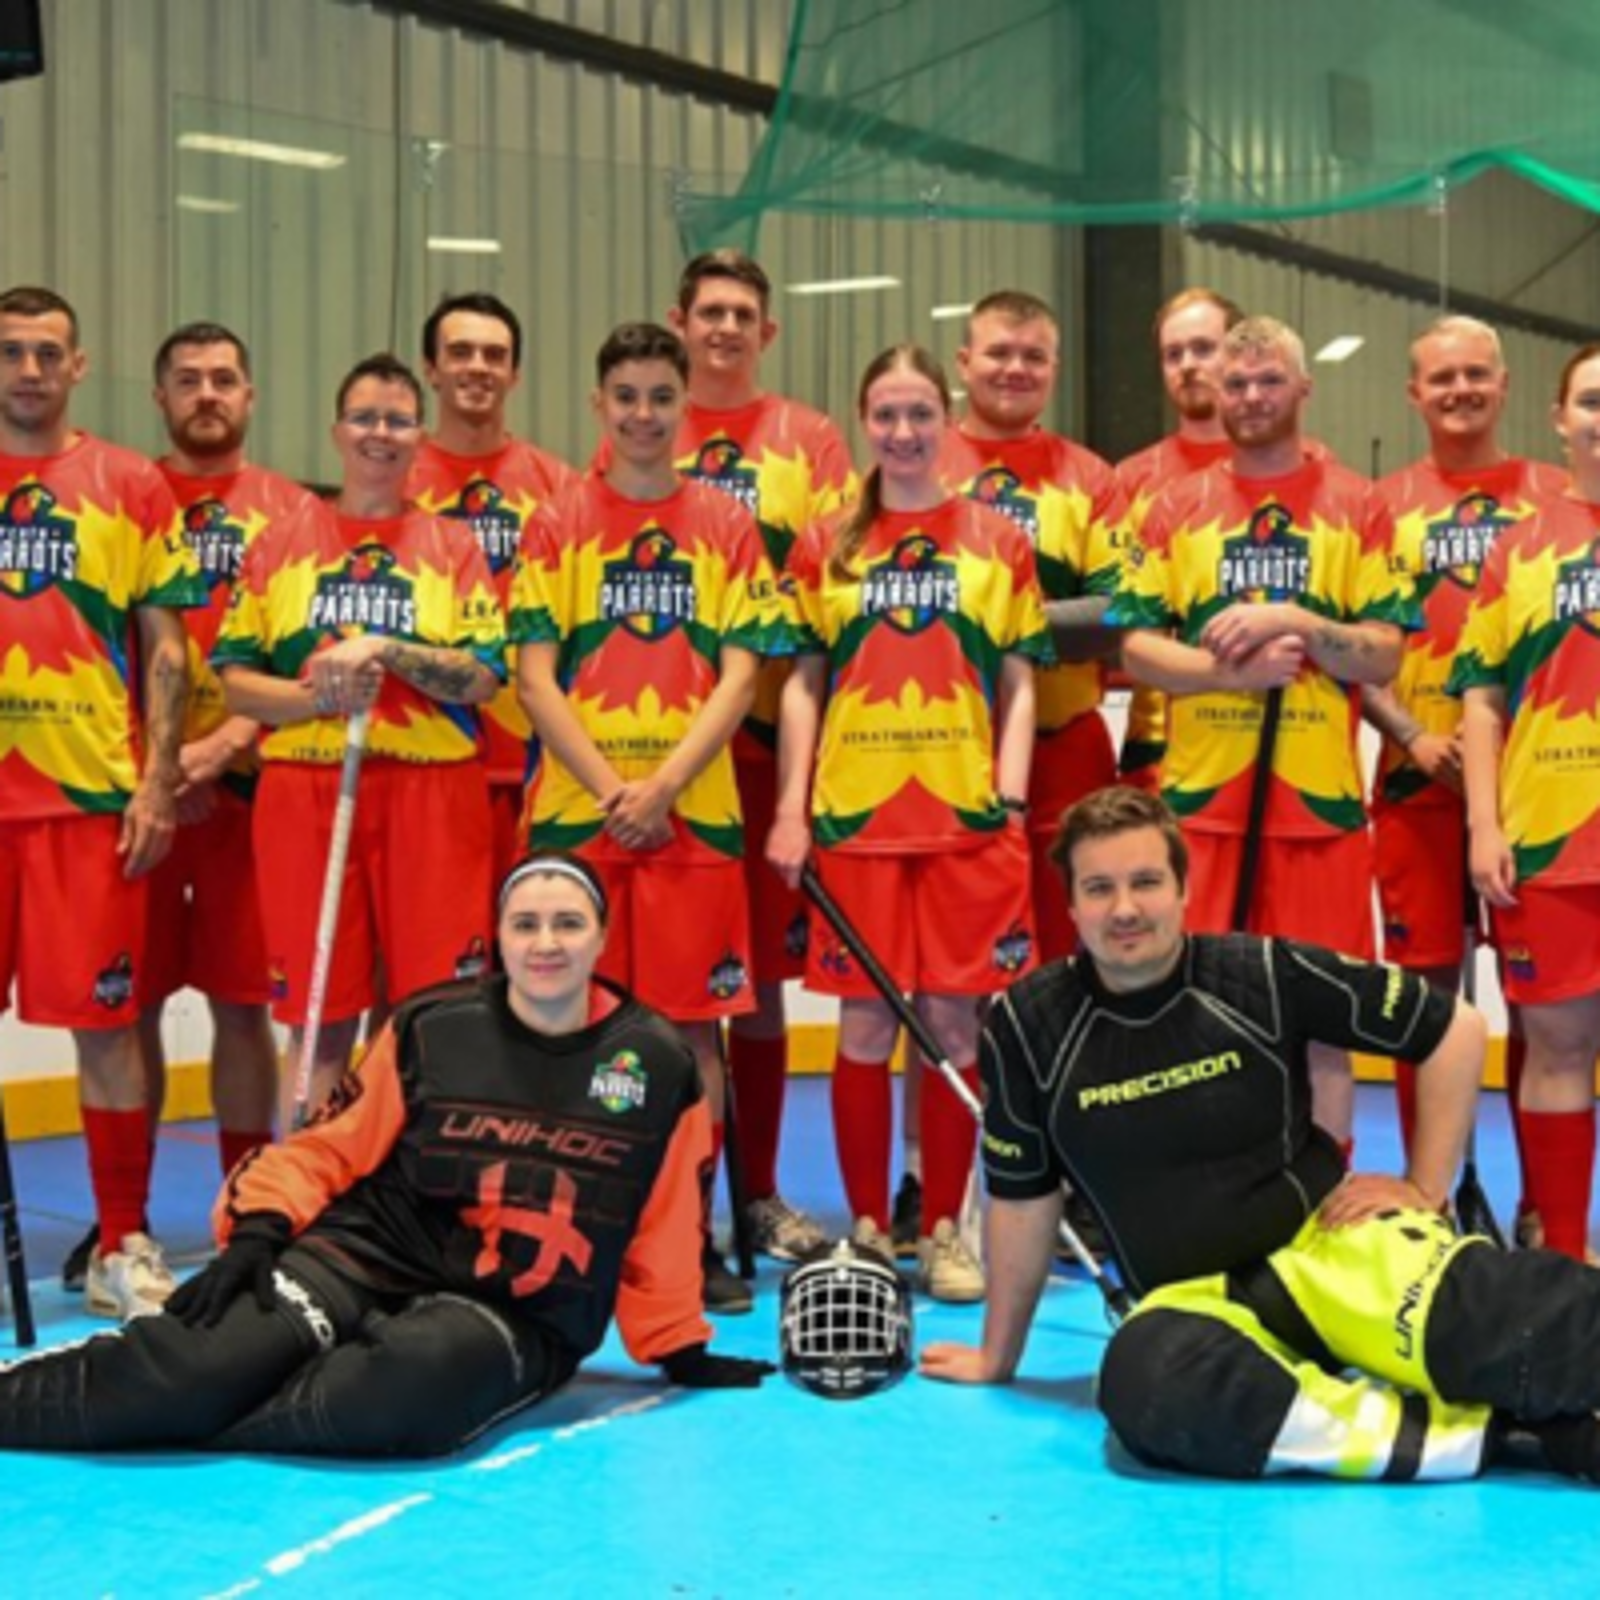 Perth Parrots Floorball squad in their team kit